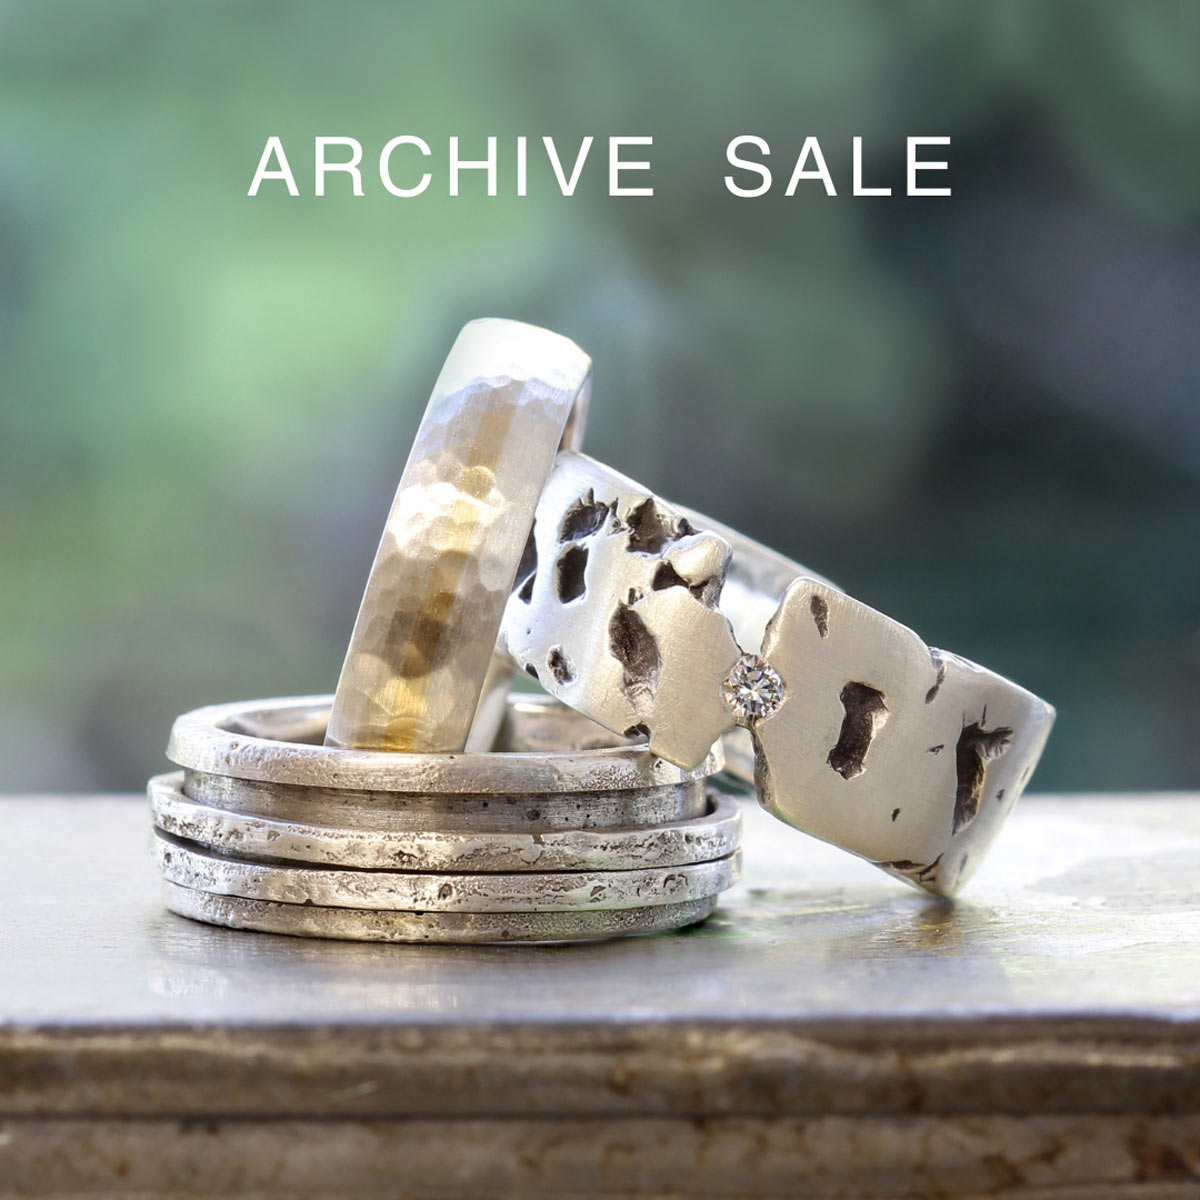 Archive sale at Justin Duance Jewellery